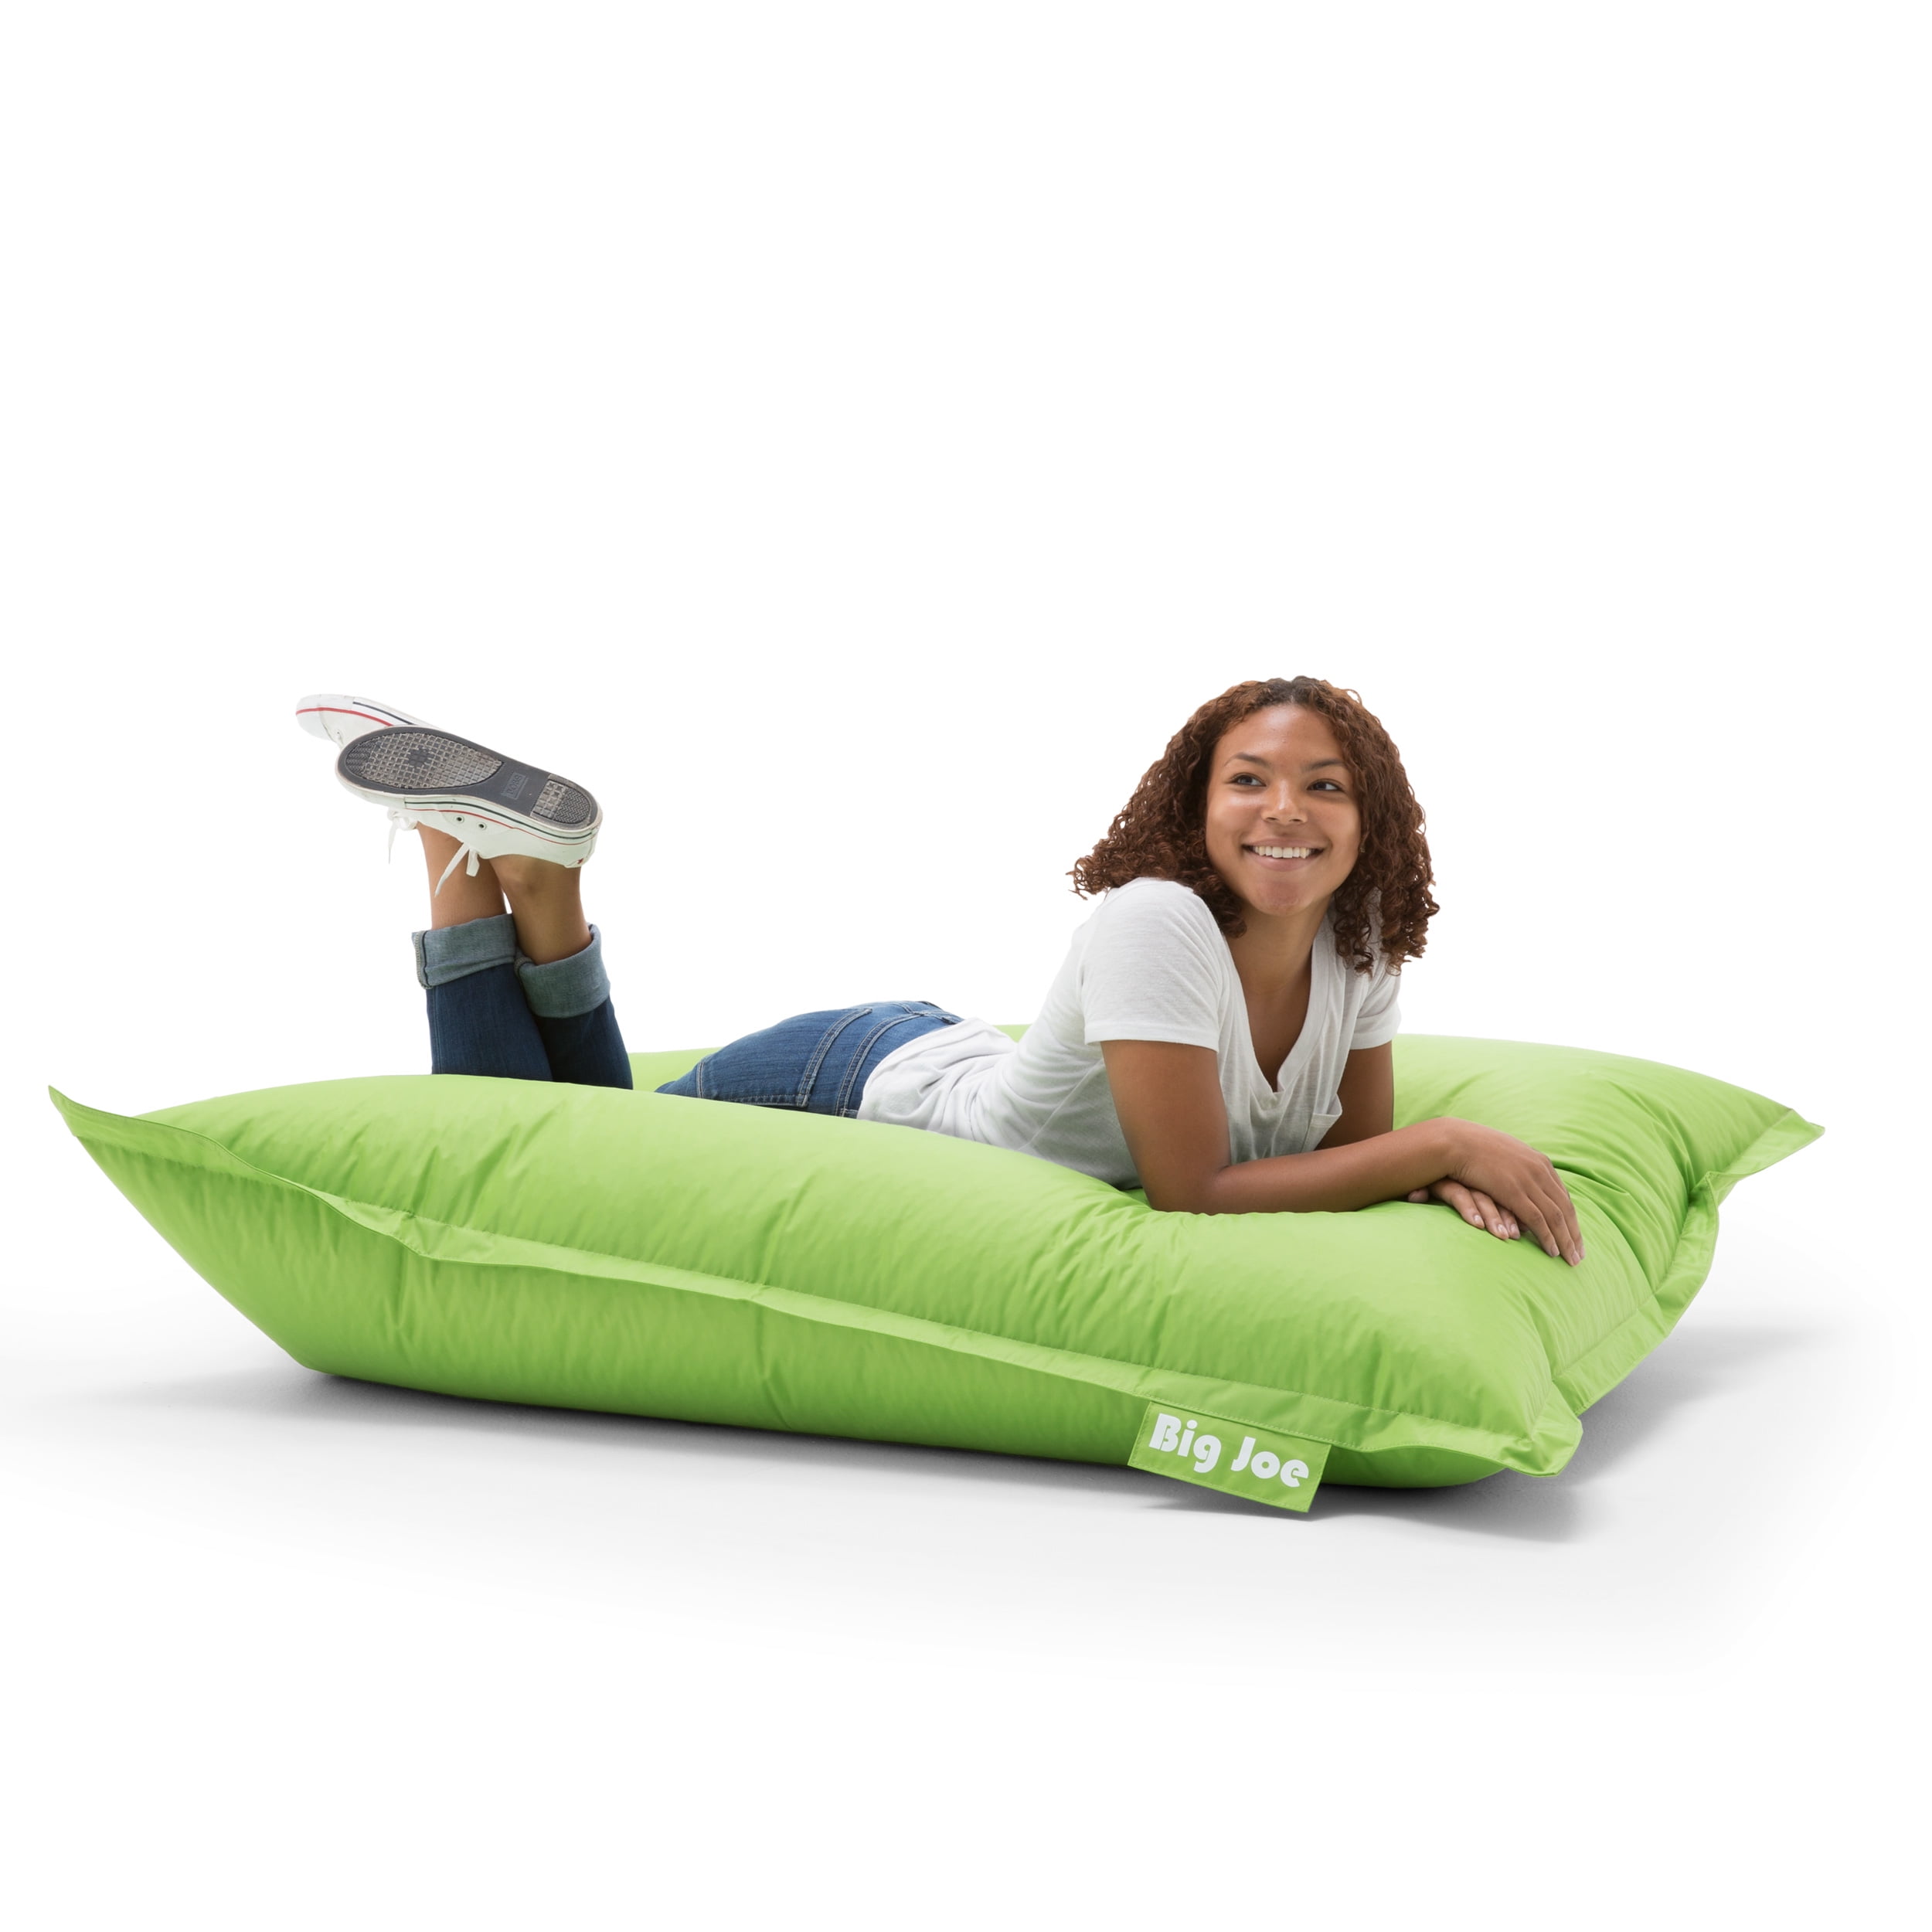  Big Joe Classic Bean Bag Chair, Spicy Lime Smartmax, 2ft Round  & Bean Refill 2Pk Polystyrene Beans for Bean Bags or Crafts, 100 Liters per  Bag : Everything Else